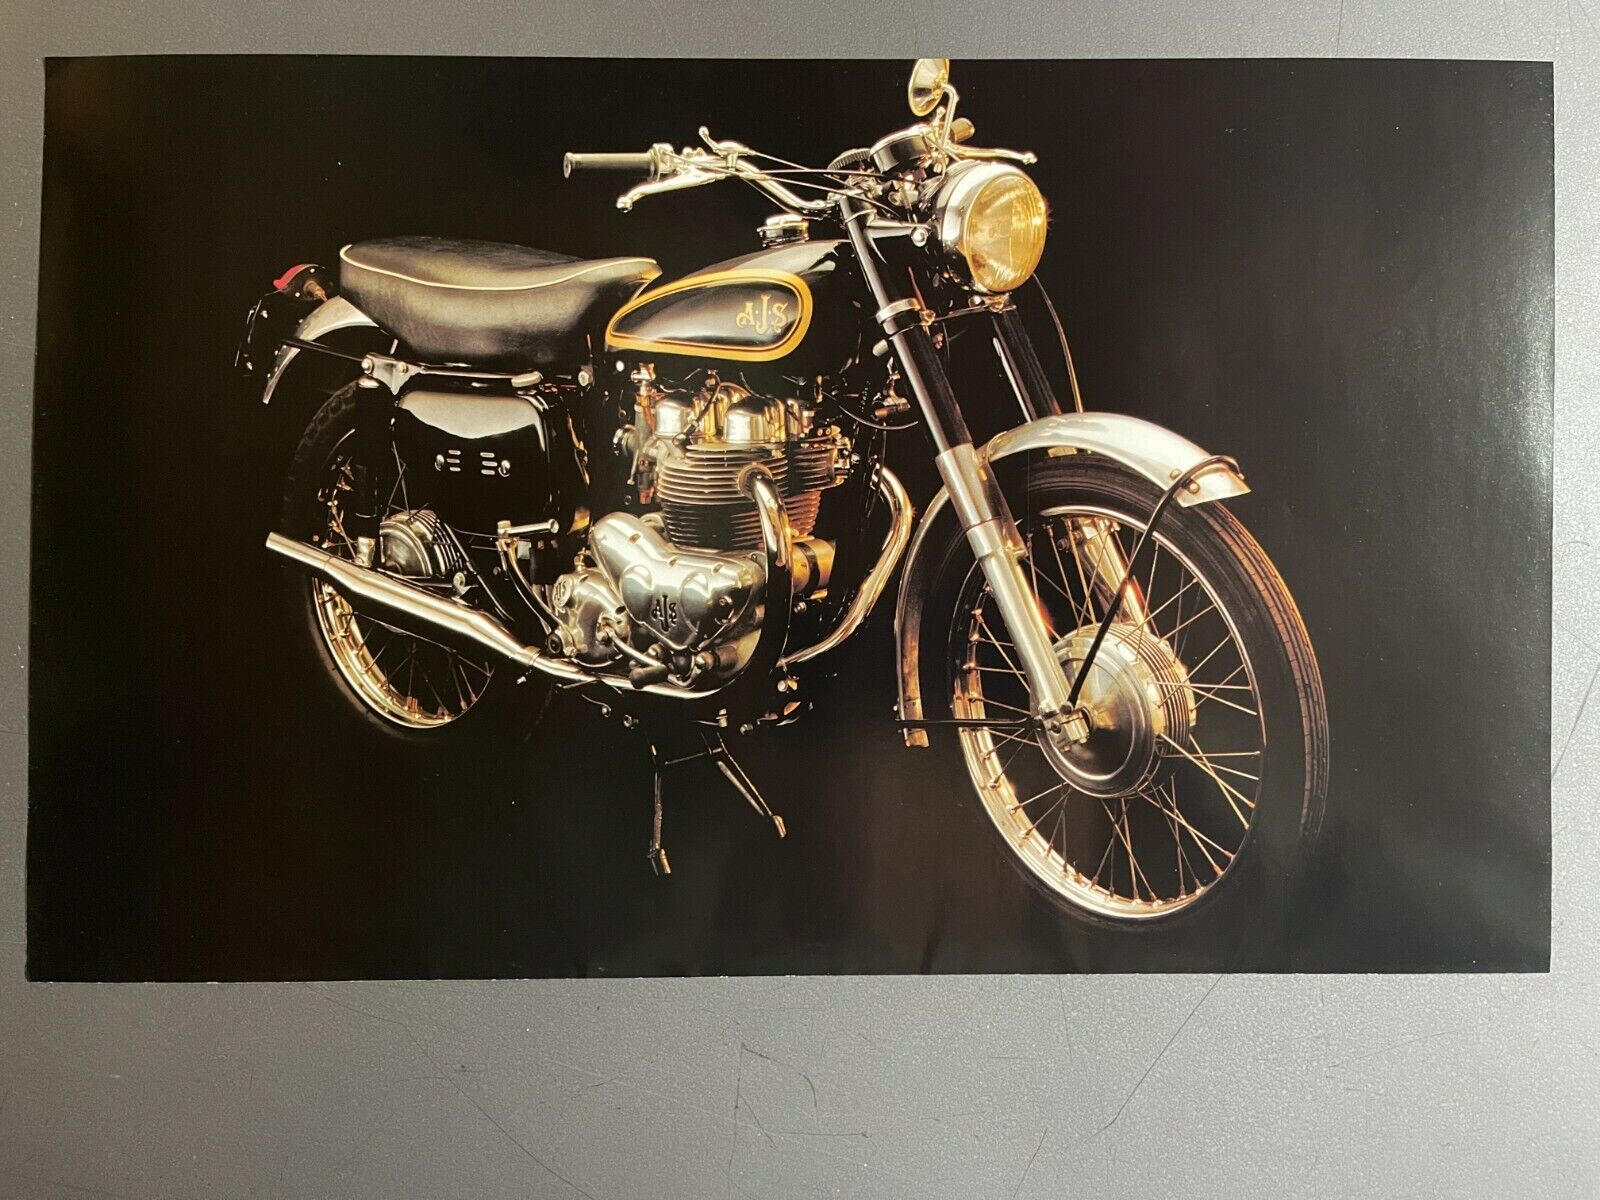 1958 AJS 31CS Motorcycle Picture, Print - RARE Awesome Frameable